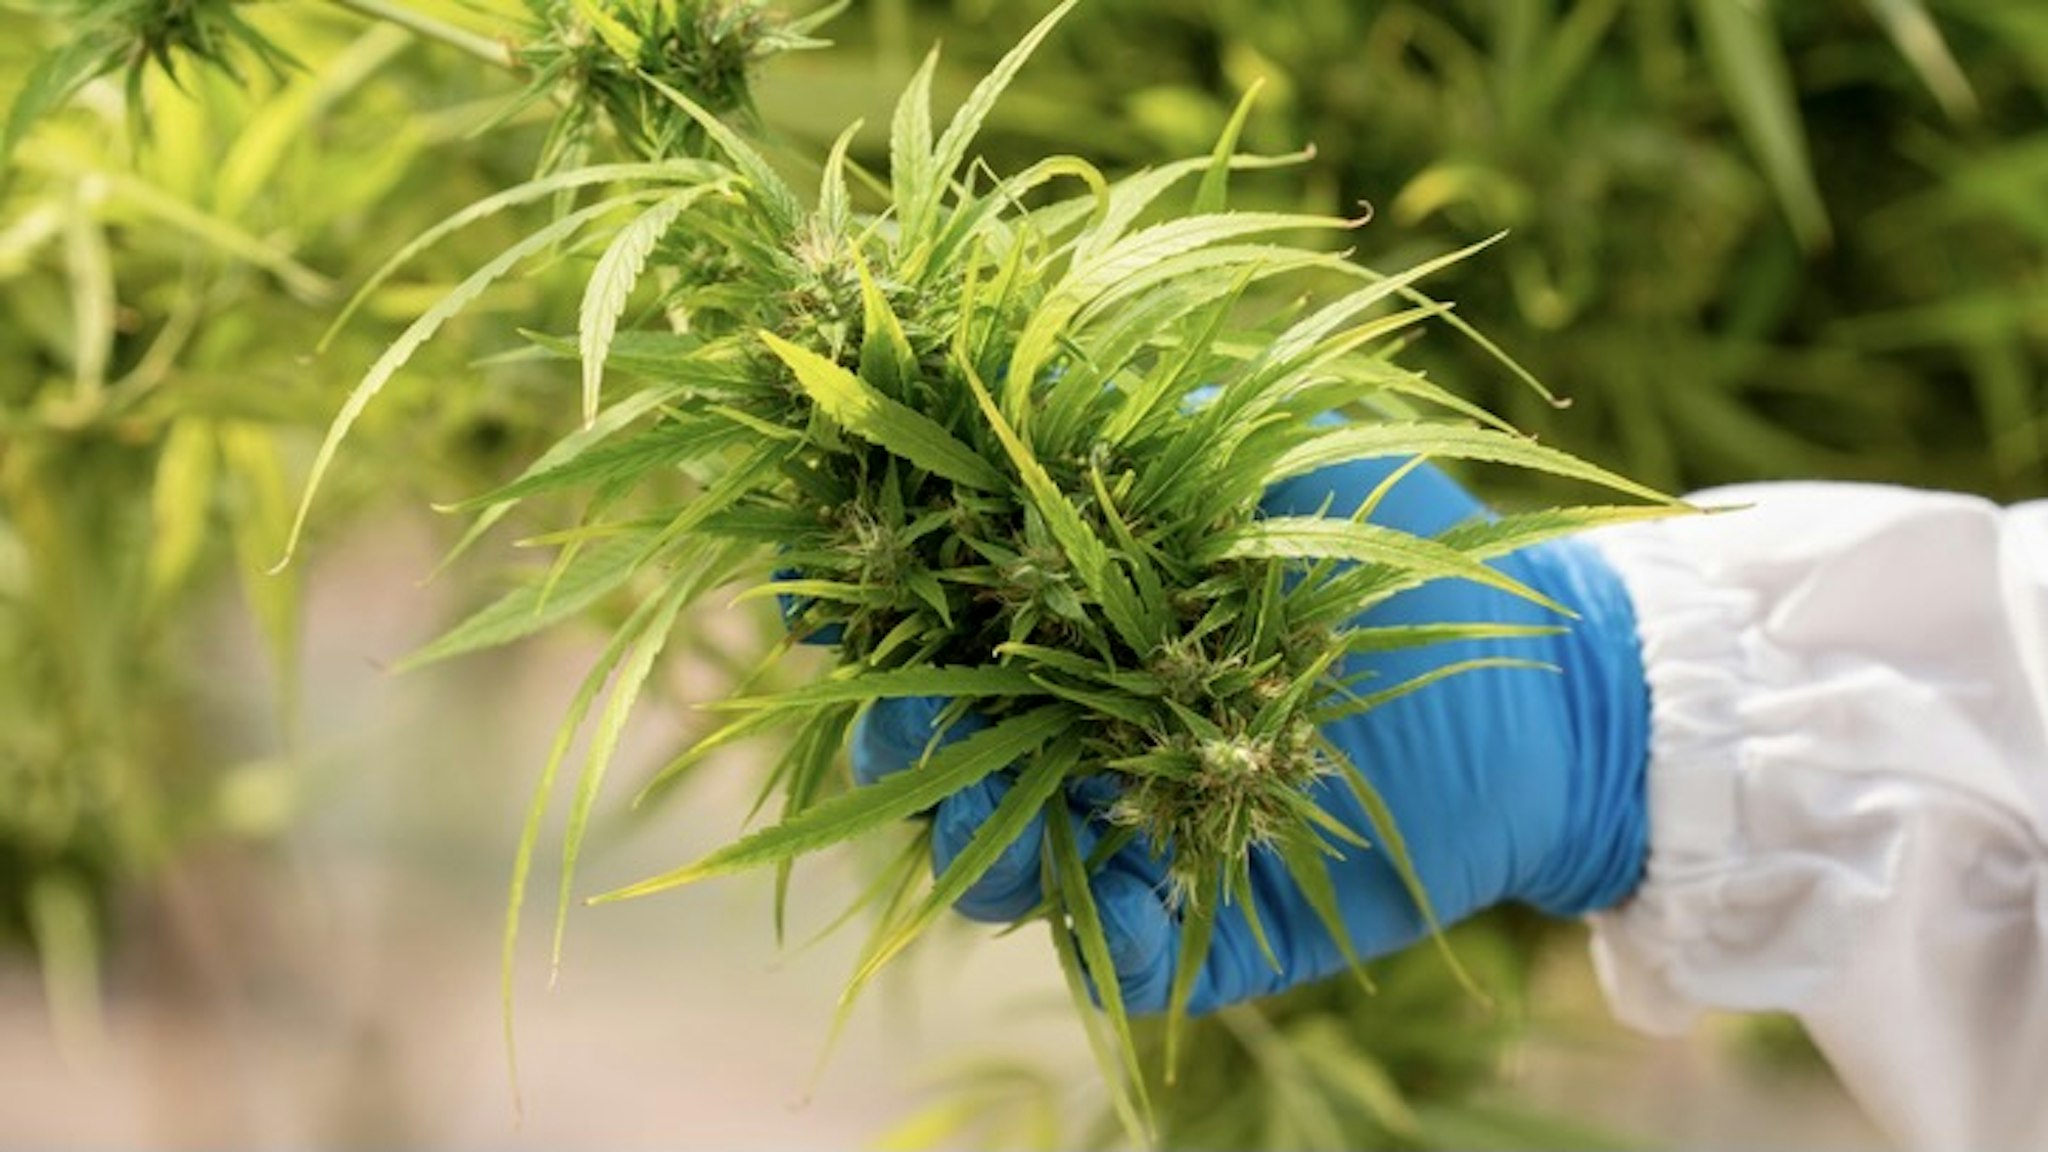 Cannabis research concepts,cbd oil,Pharmaceutical industry. - stock photo Scientist checking and analyzing hemp plants in the field,Cannabis research concepts,cbd oil,Pharmaceutical industry. Visoot Uthairam via Getty Images